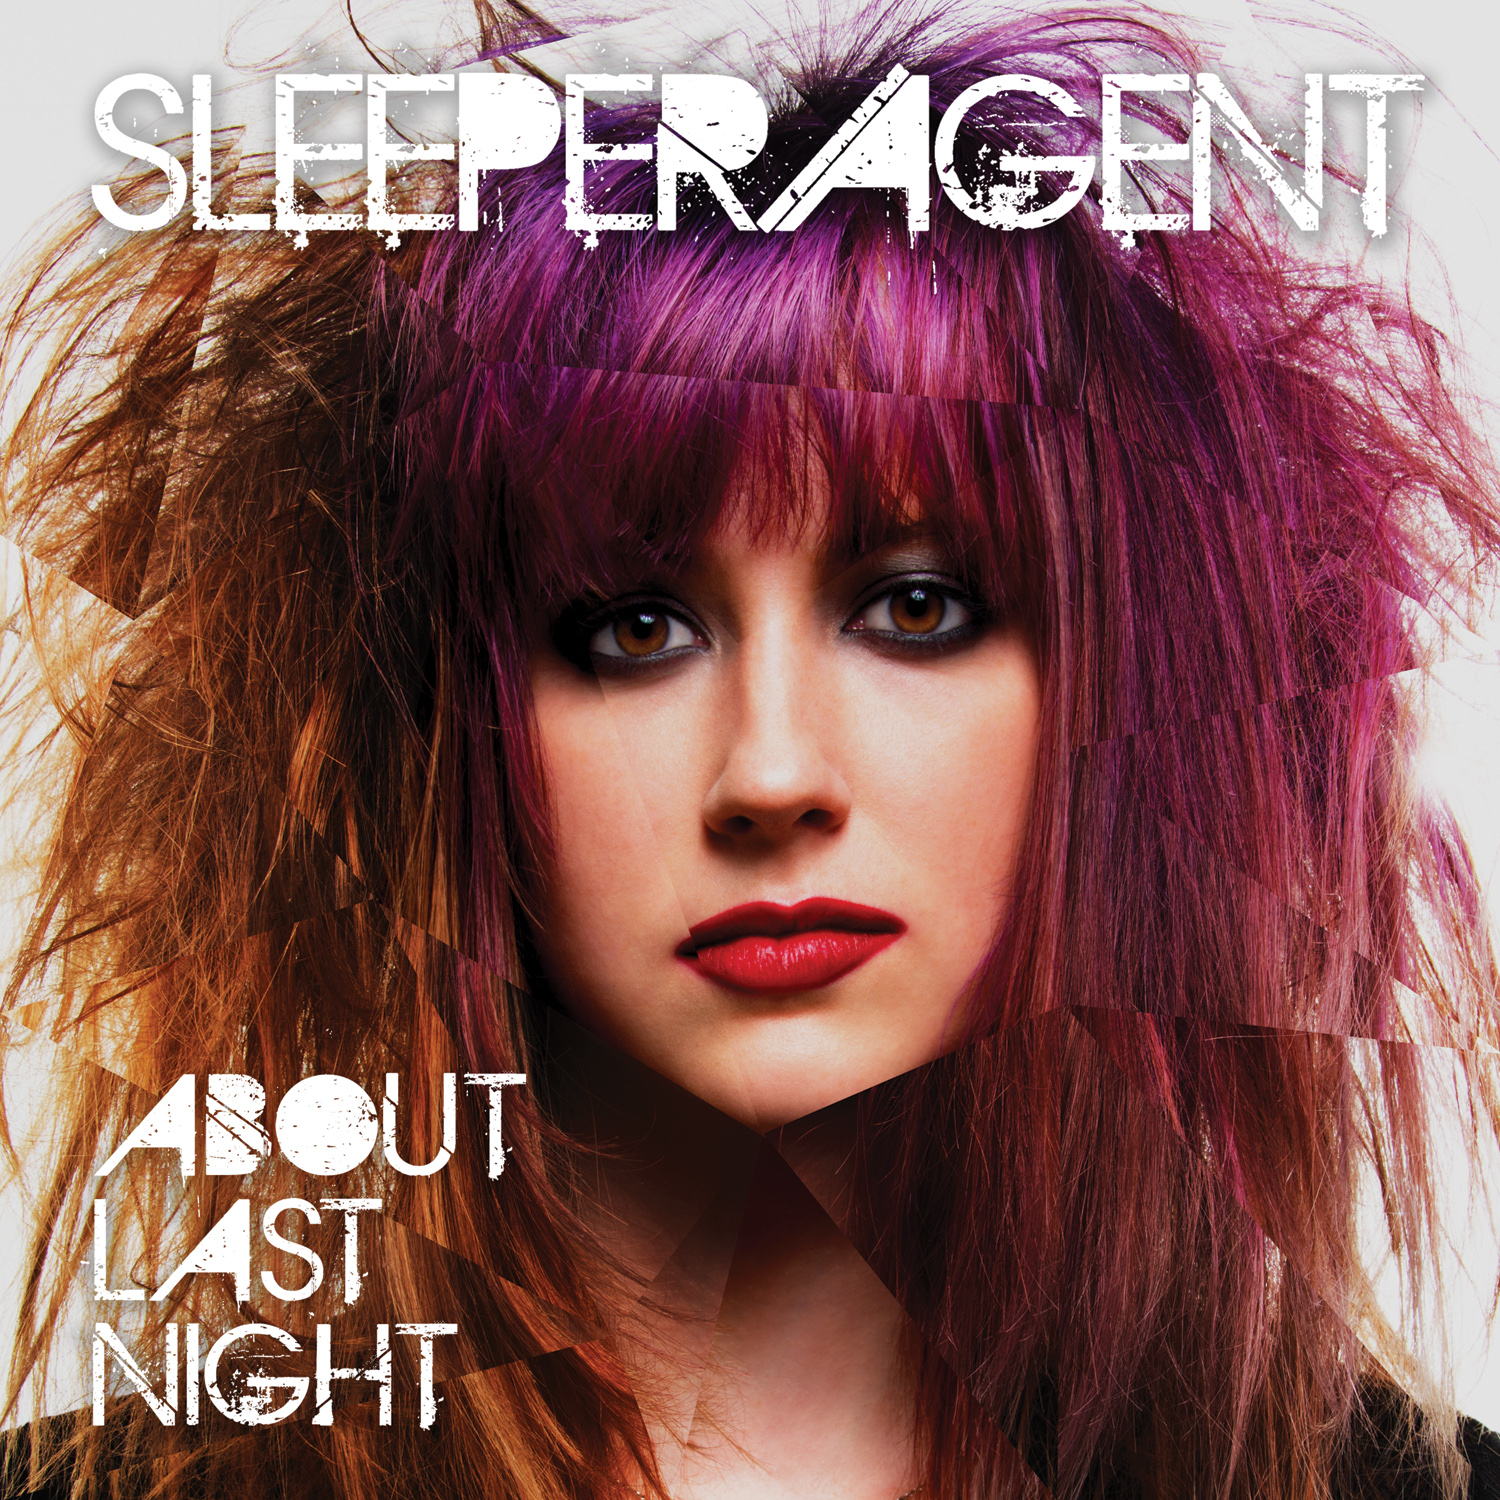 Sleeper-Agent-About-Last-Night-Cover